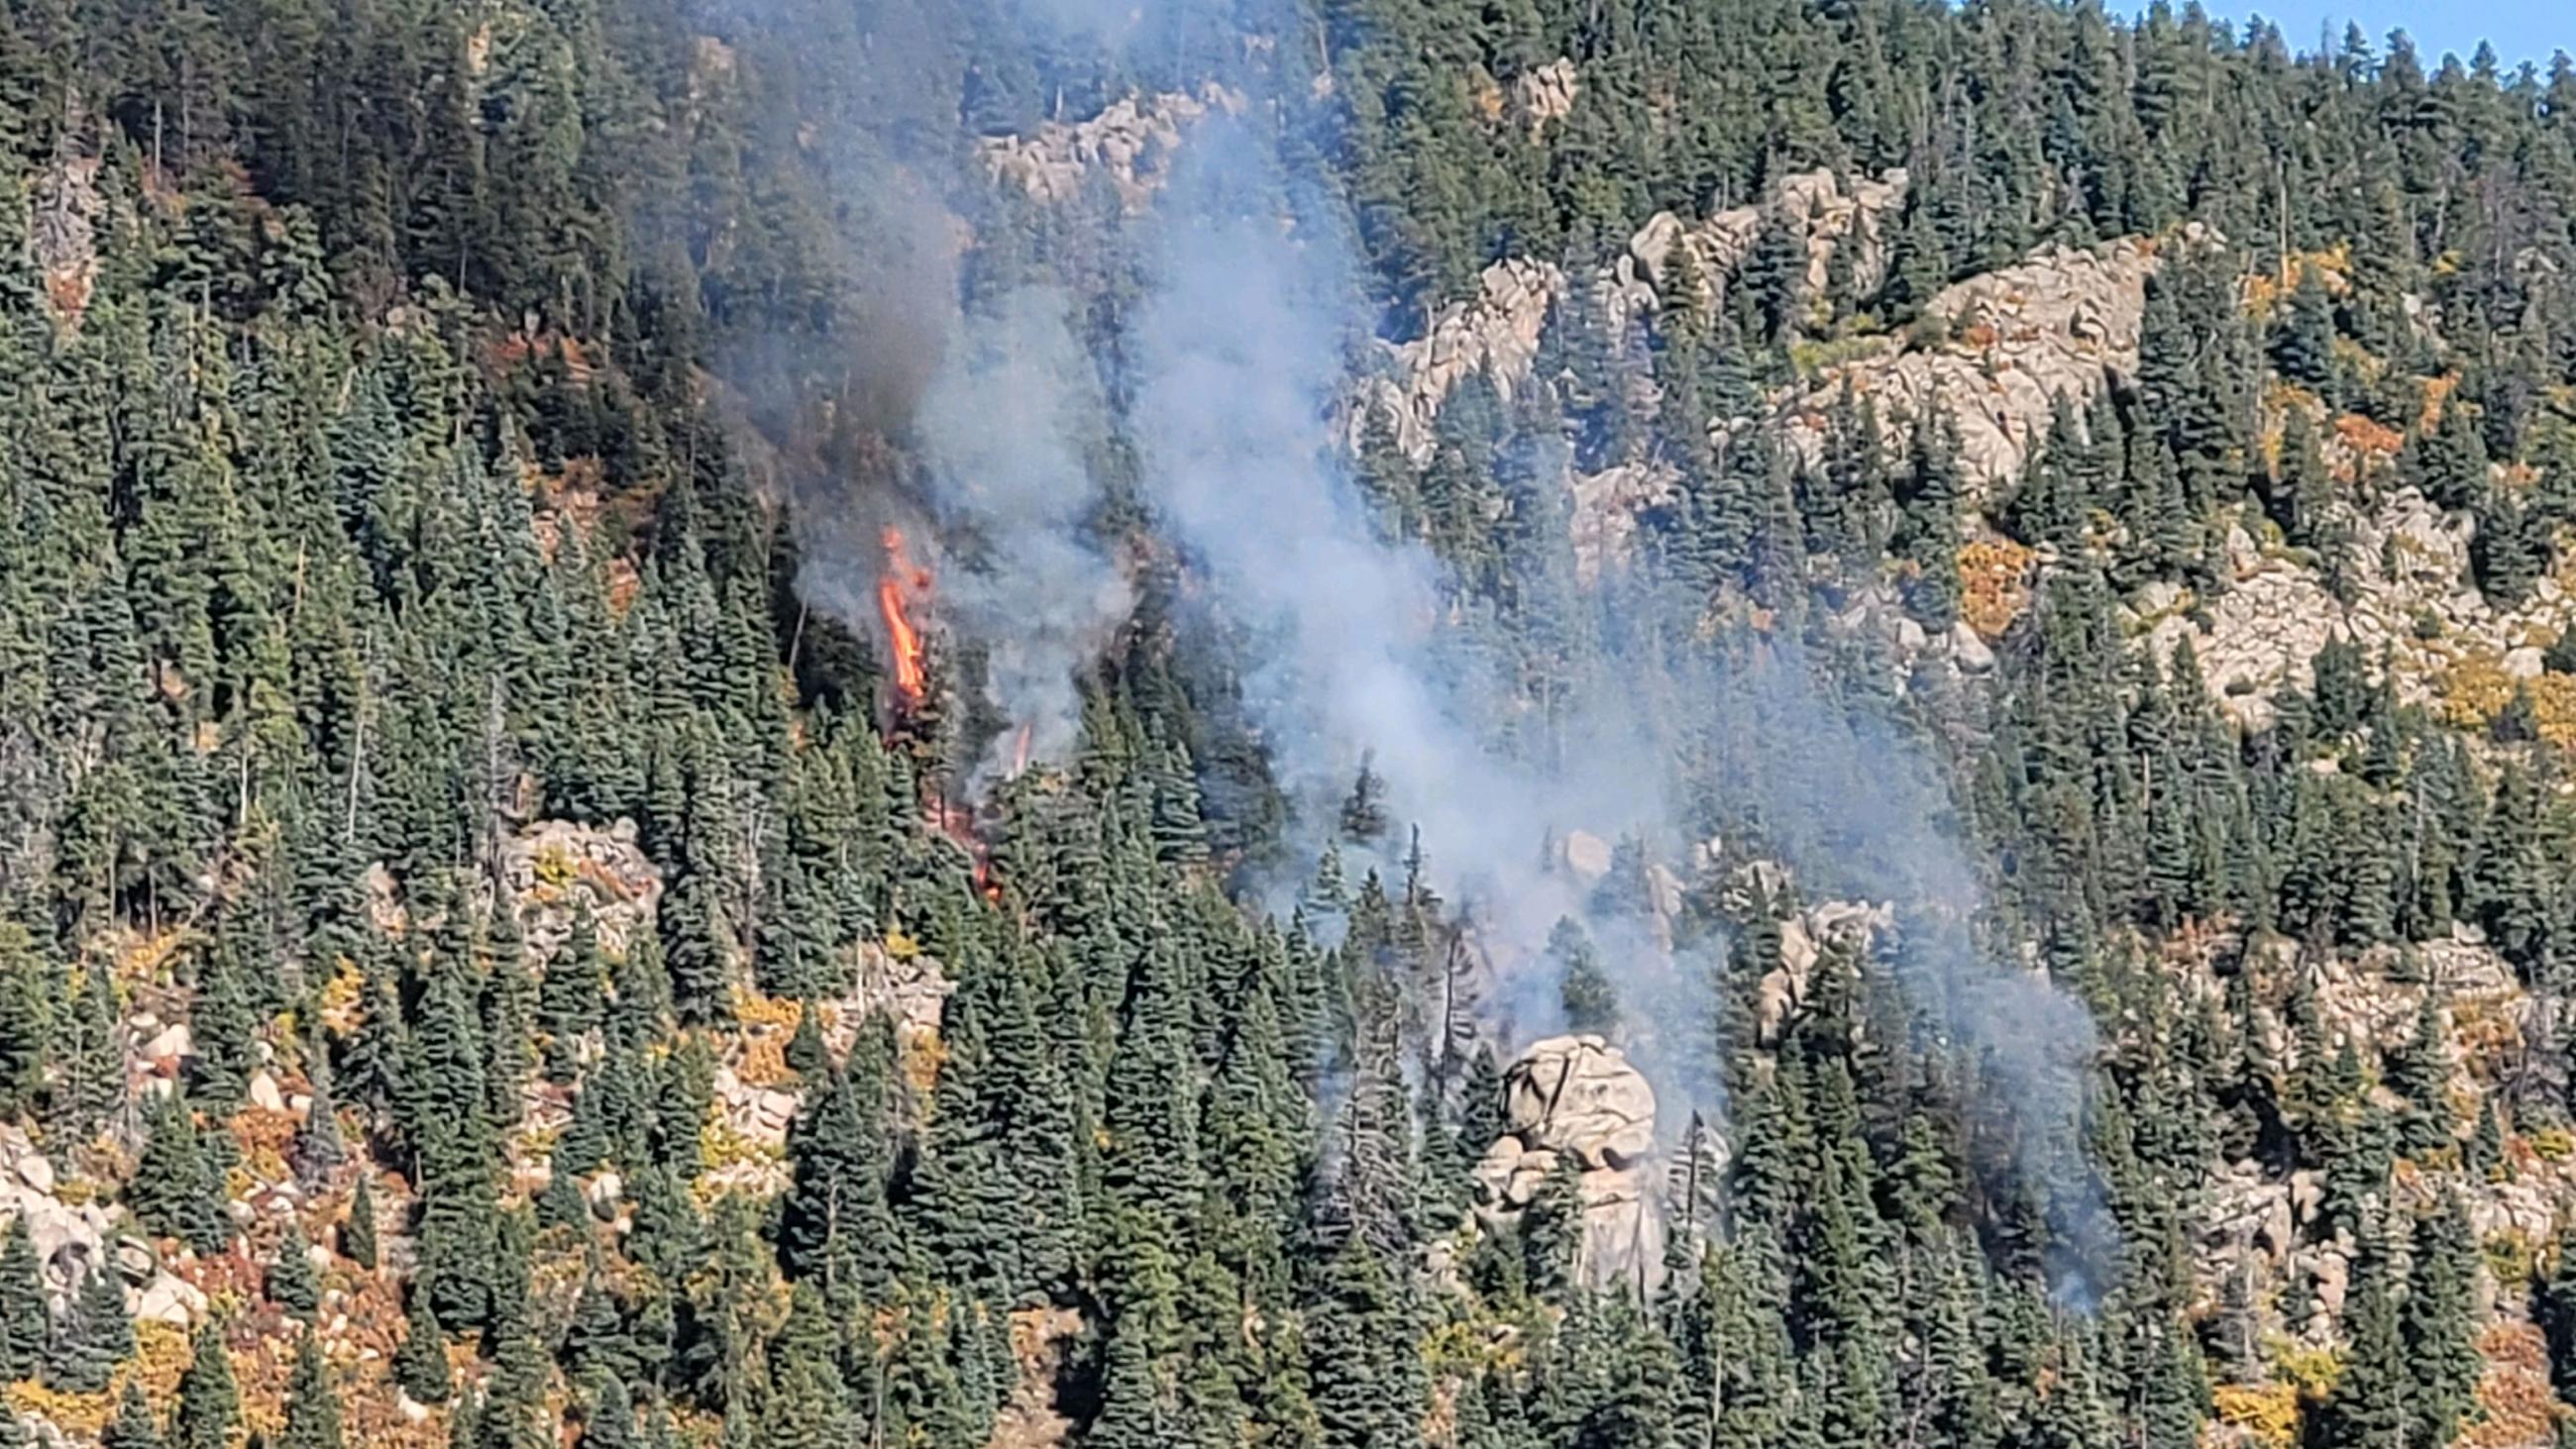 Saint Charles Fire initial response to incident. Smoke and some flames in a steep canyon.